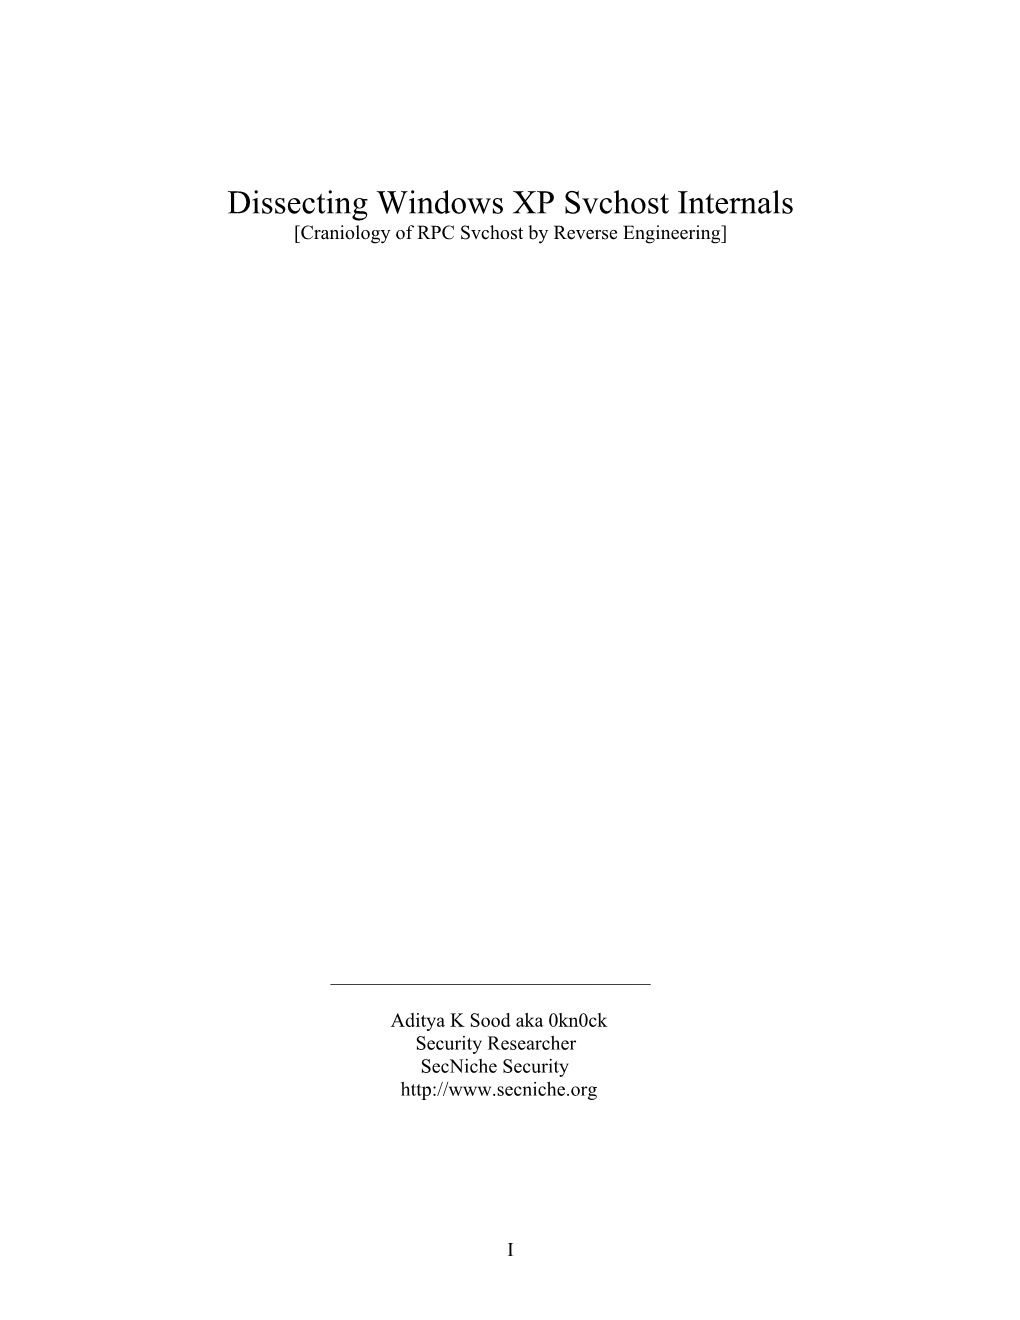 Dissecting Windows XP Svchost Internals [Craniology of RPC Svchost by Reverse Engineering]